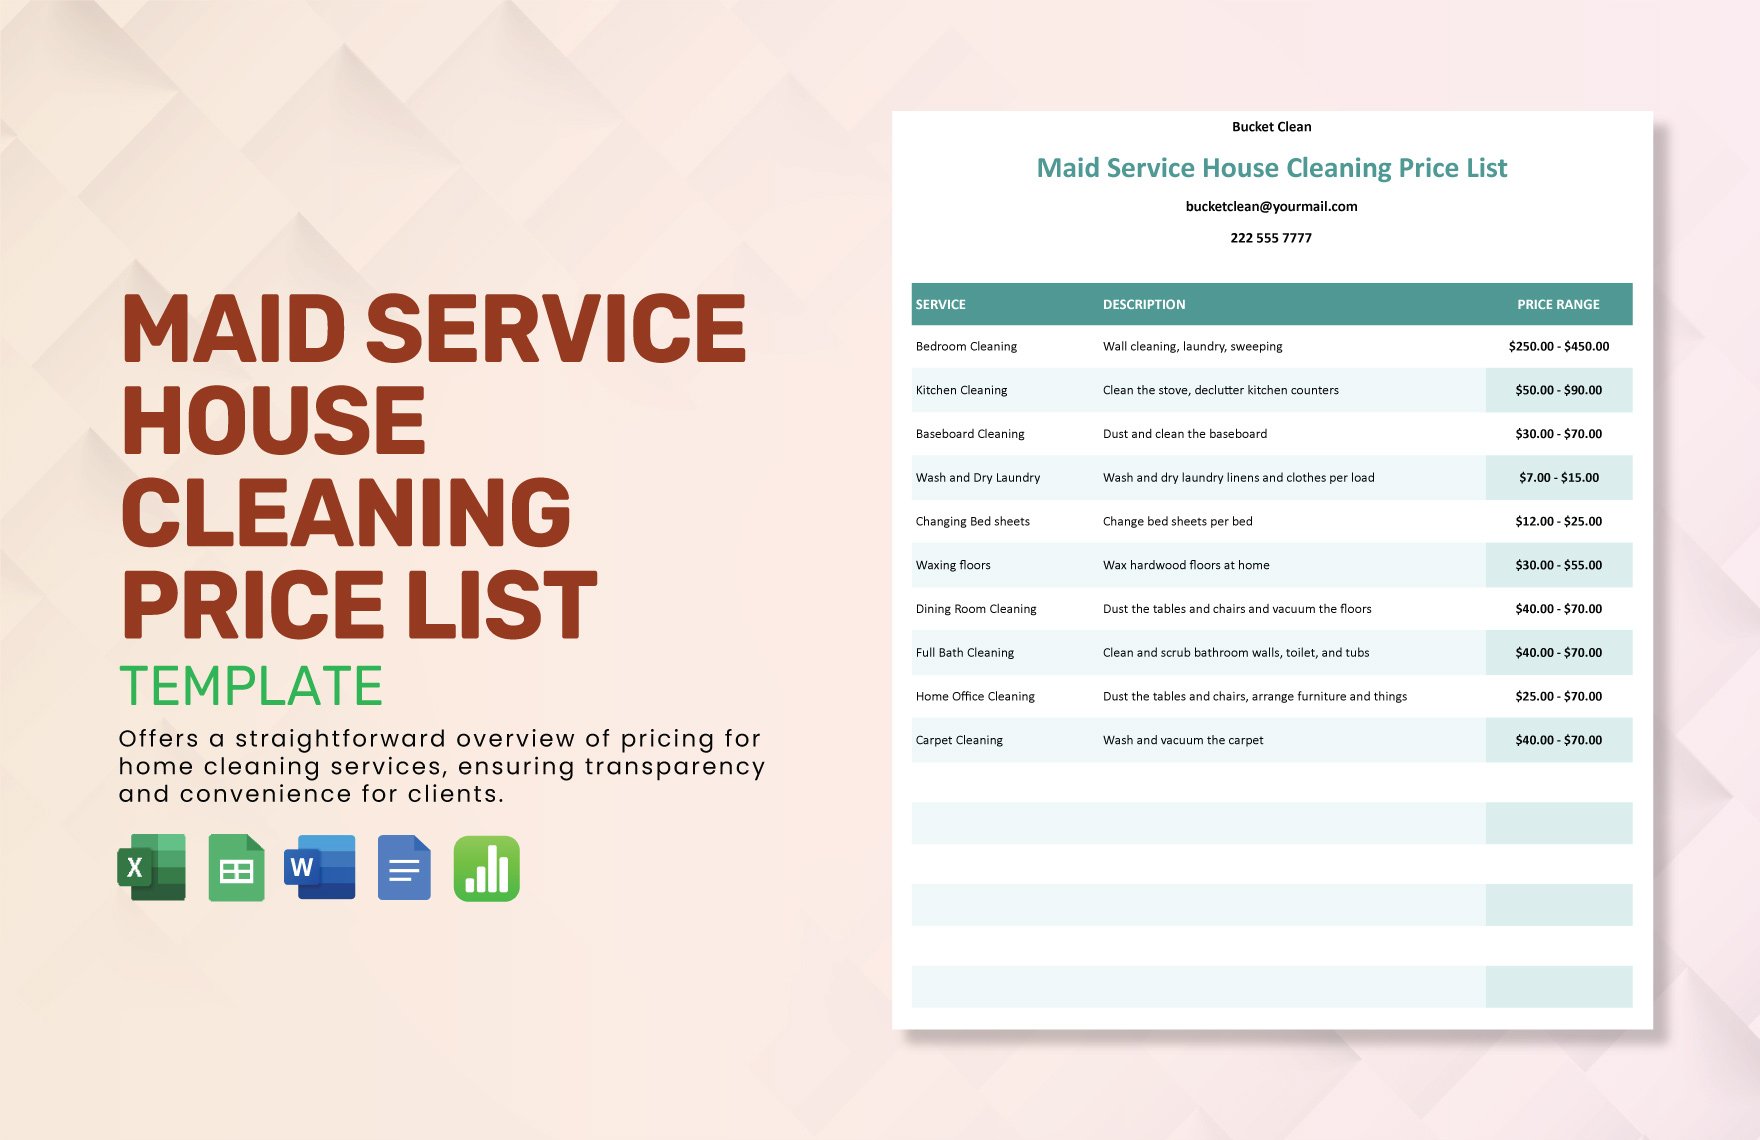 Maid Service House Cleaning Price List Template in Word, Google Docs, Excel, Google Sheets, Apple Numbers